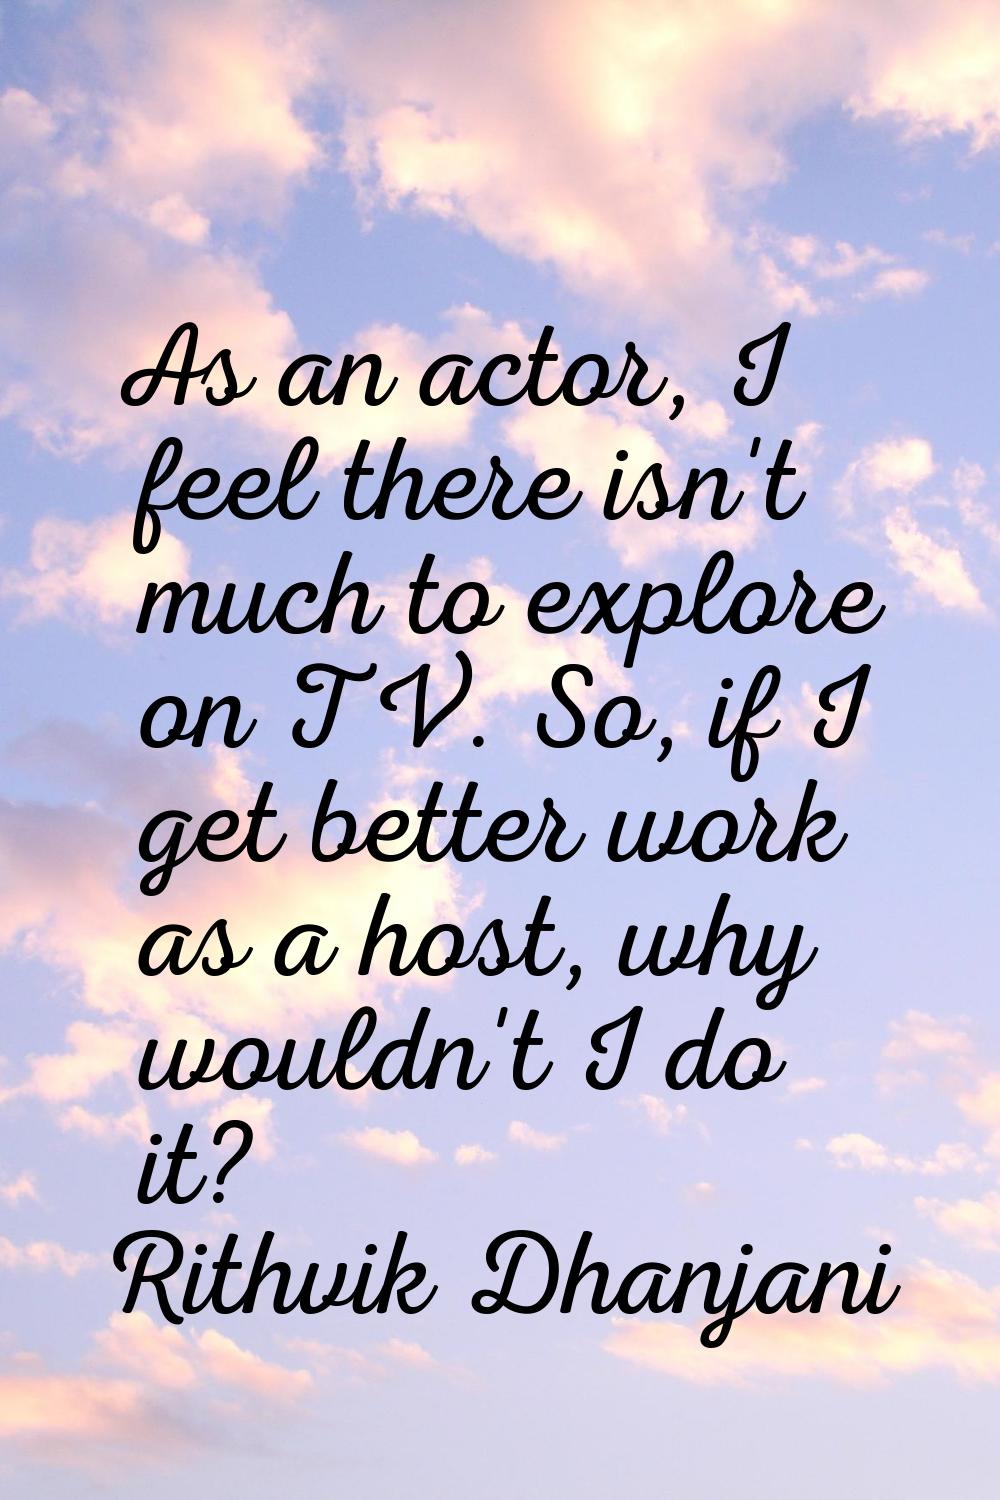 As an actor, I feel there isn't much to explore on TV. So, if I get better work as a host, why woul